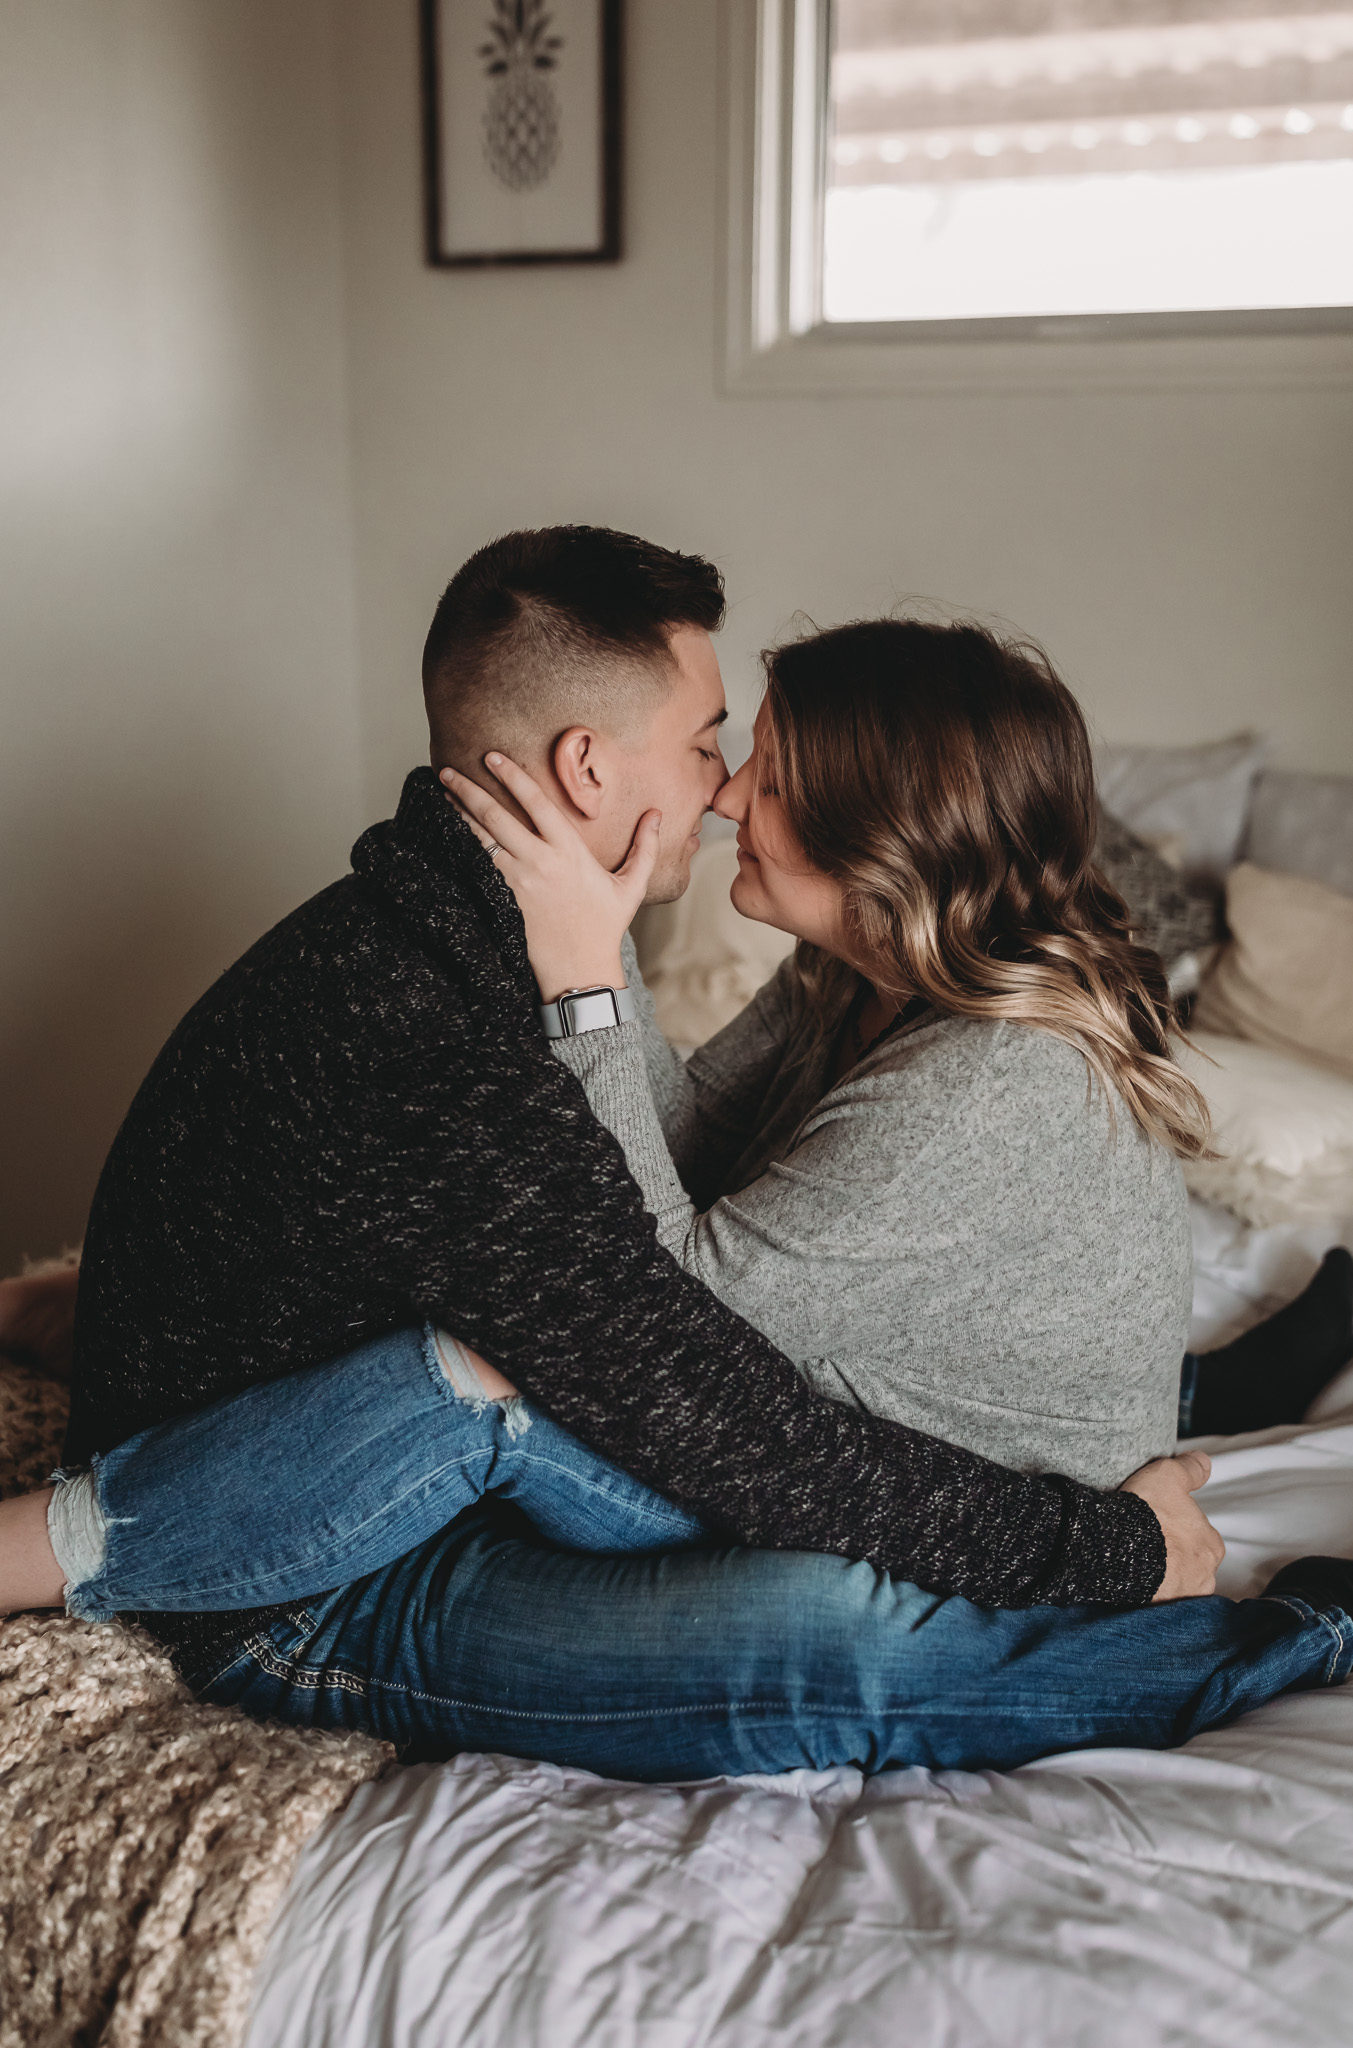 couples photo poses in home